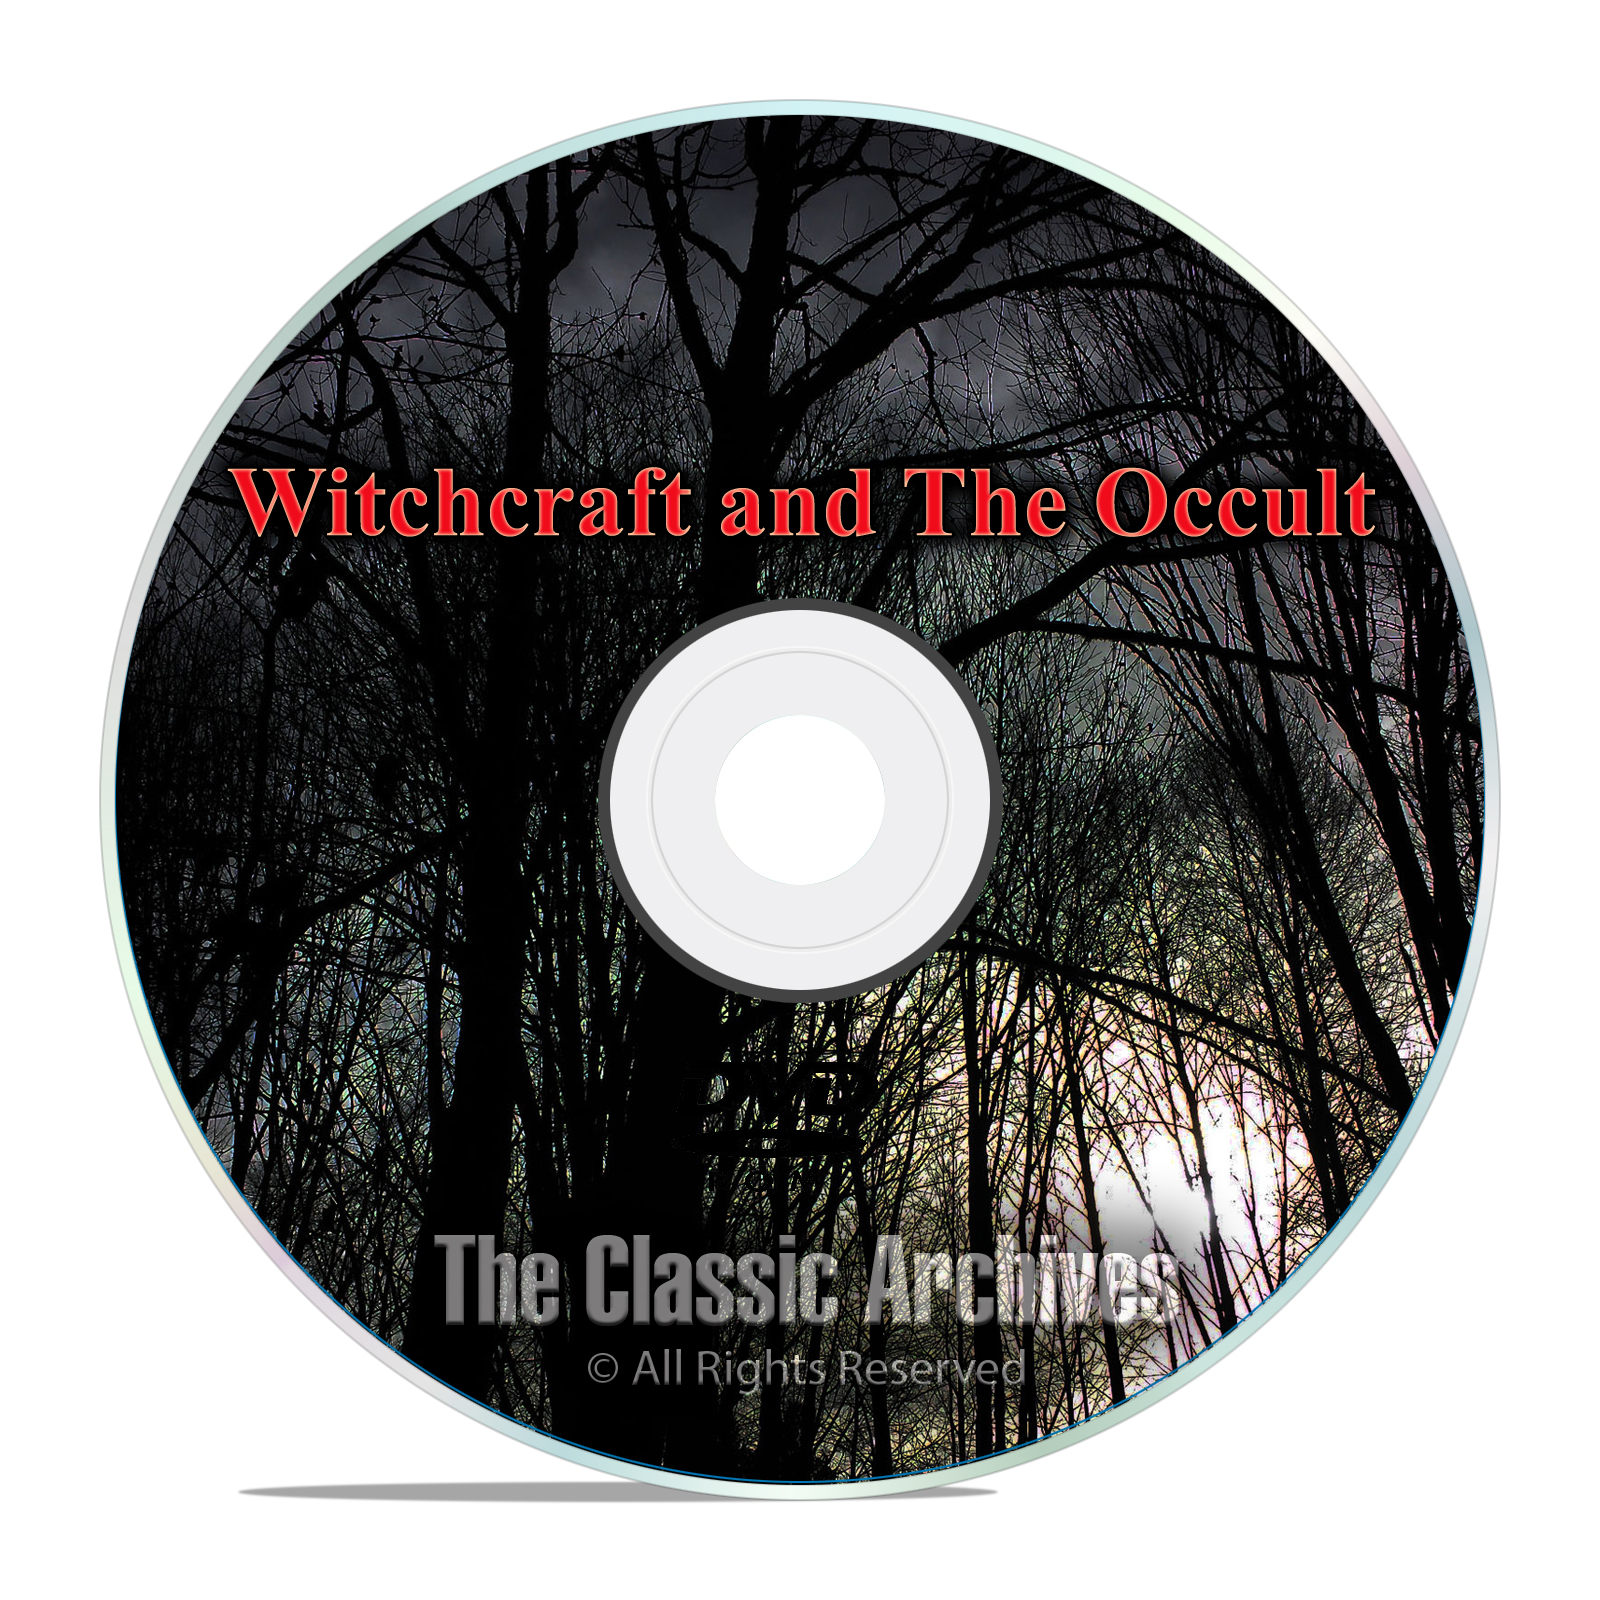 400 Witchcraft, Witch, Witches, Occult, Magic, Demonology Books Library DVD